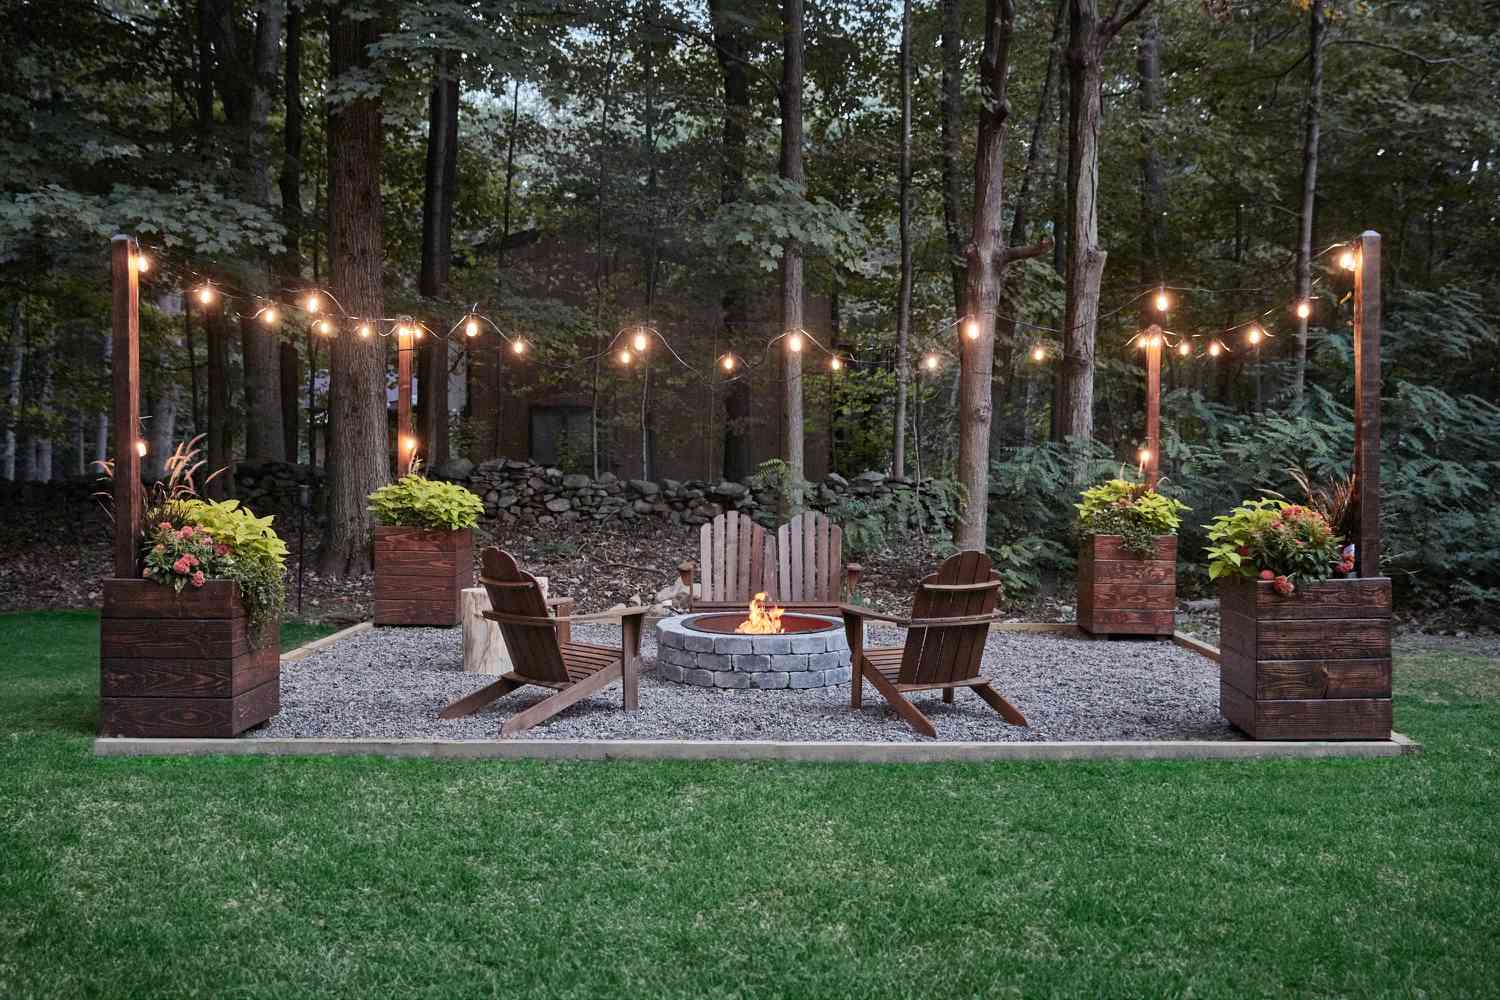 Outdoor Fire Pit with String Lights: Cozy Ambiance for Your Yard插图3